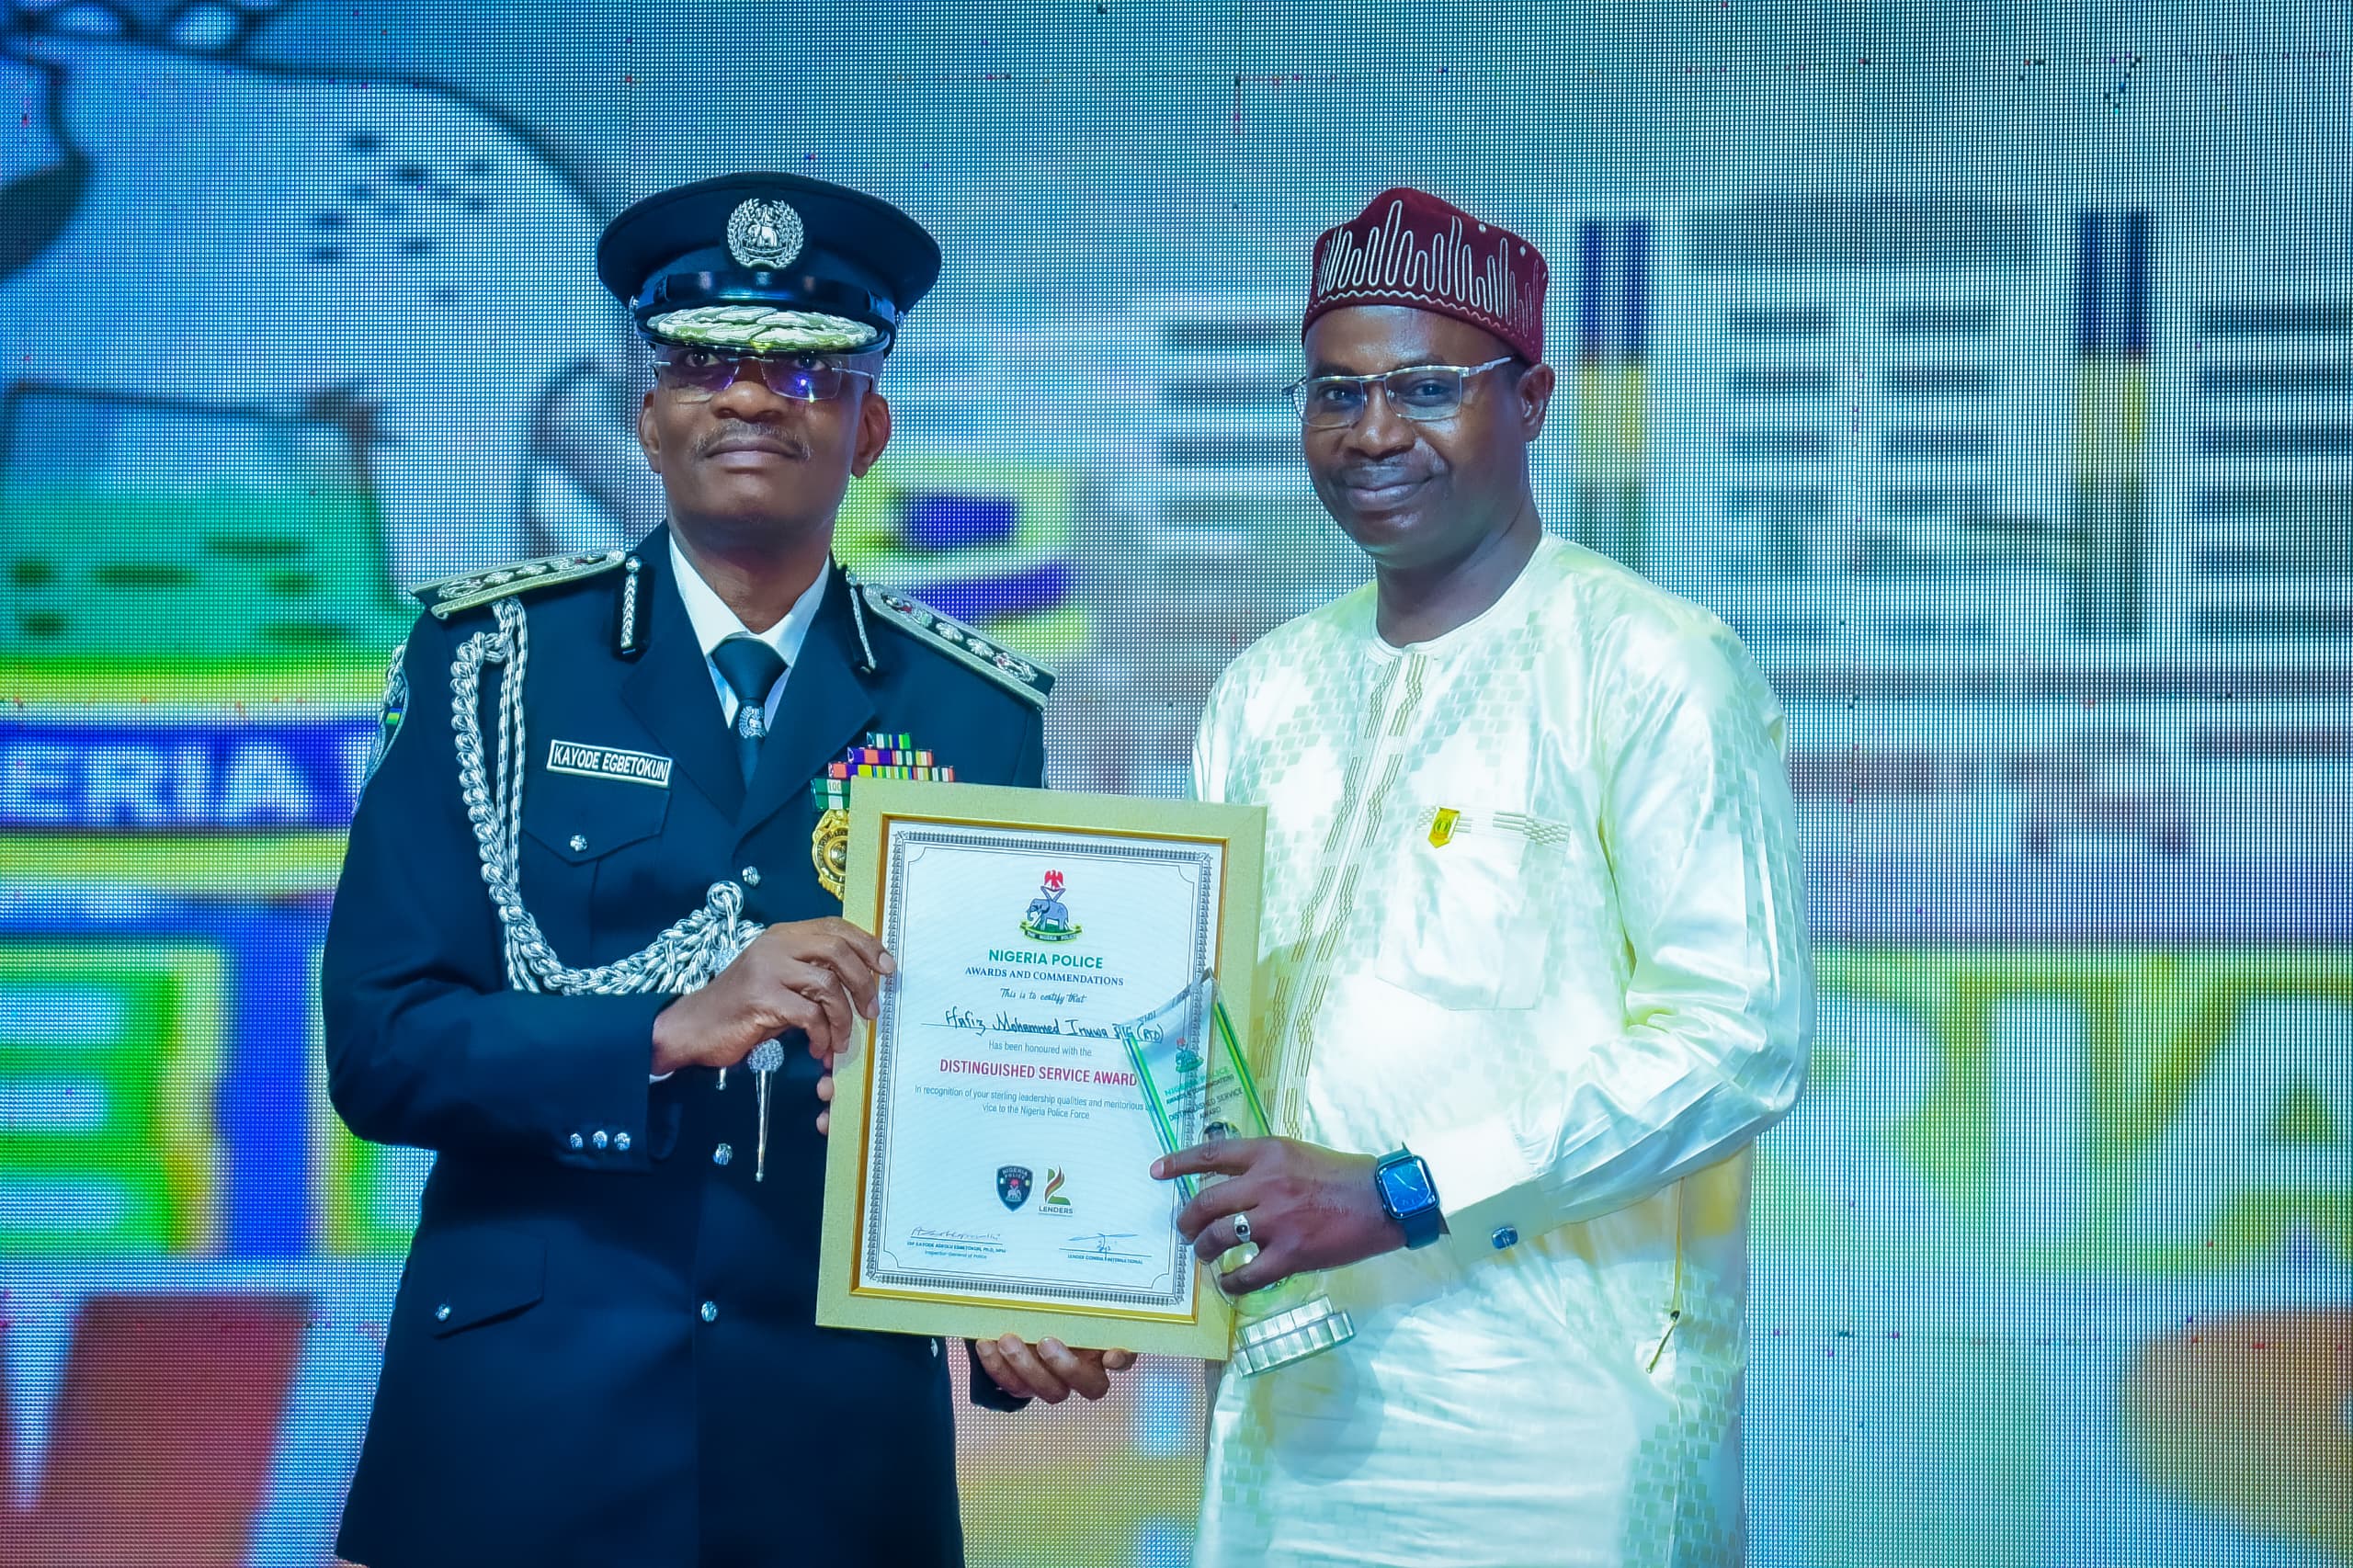 Inspector General of Police, IGP Kayode Egbetokun presenting an award to awardee at the inaugural Nigeria Police Awards and Commendation Ceremony held at the Congress Hall, Transcorp Hilton, Abuja. 